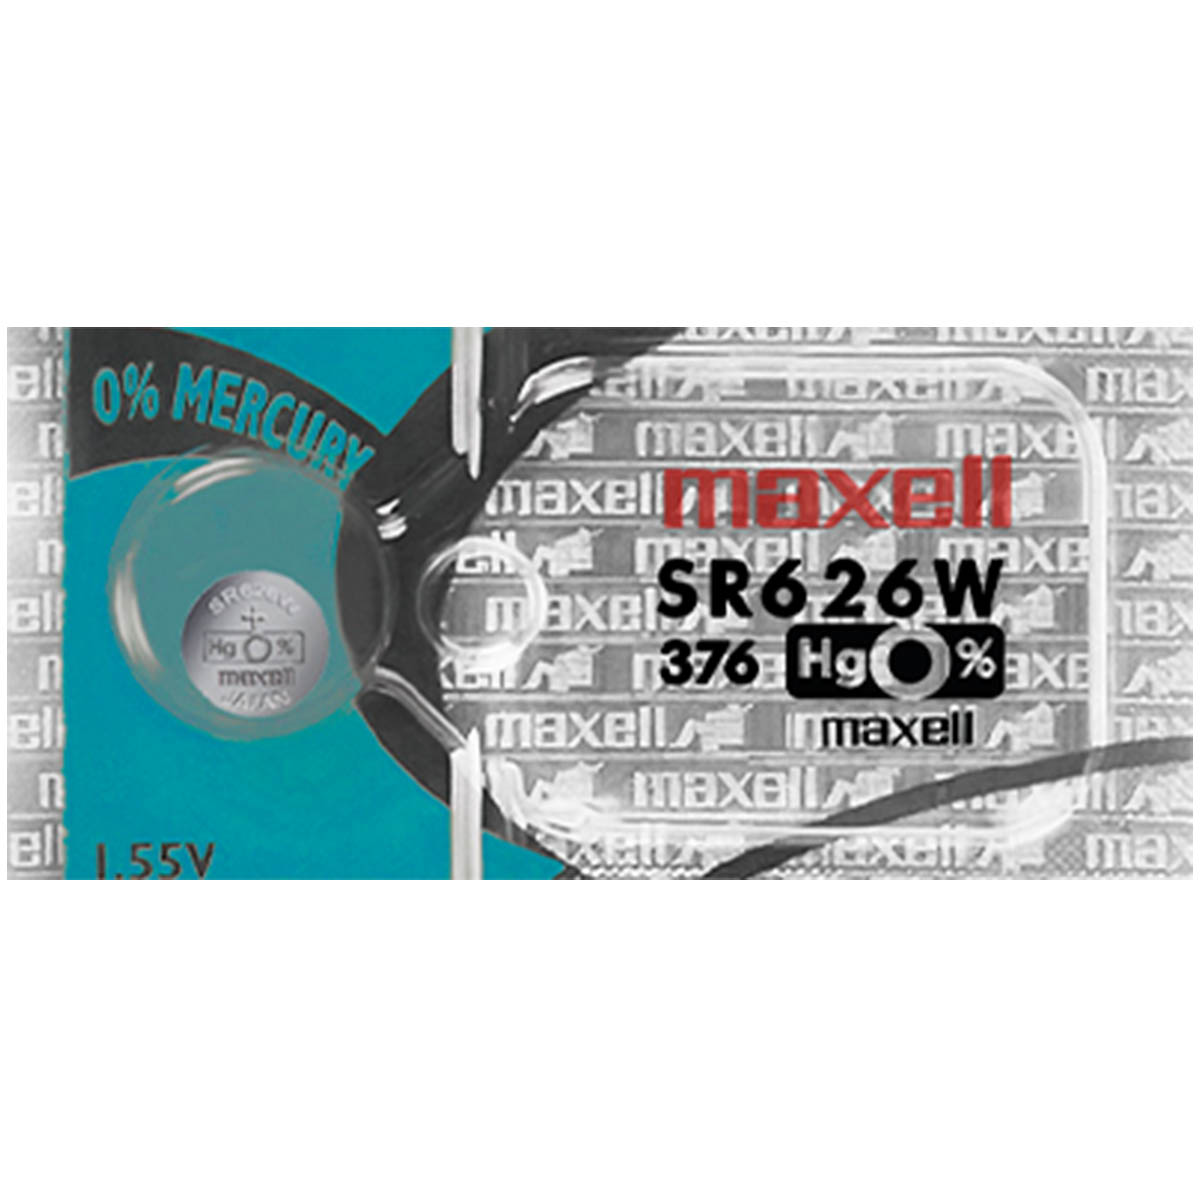 Maxell 376 Watch Battery (SR626SW ) Silver Oxide 1.55V